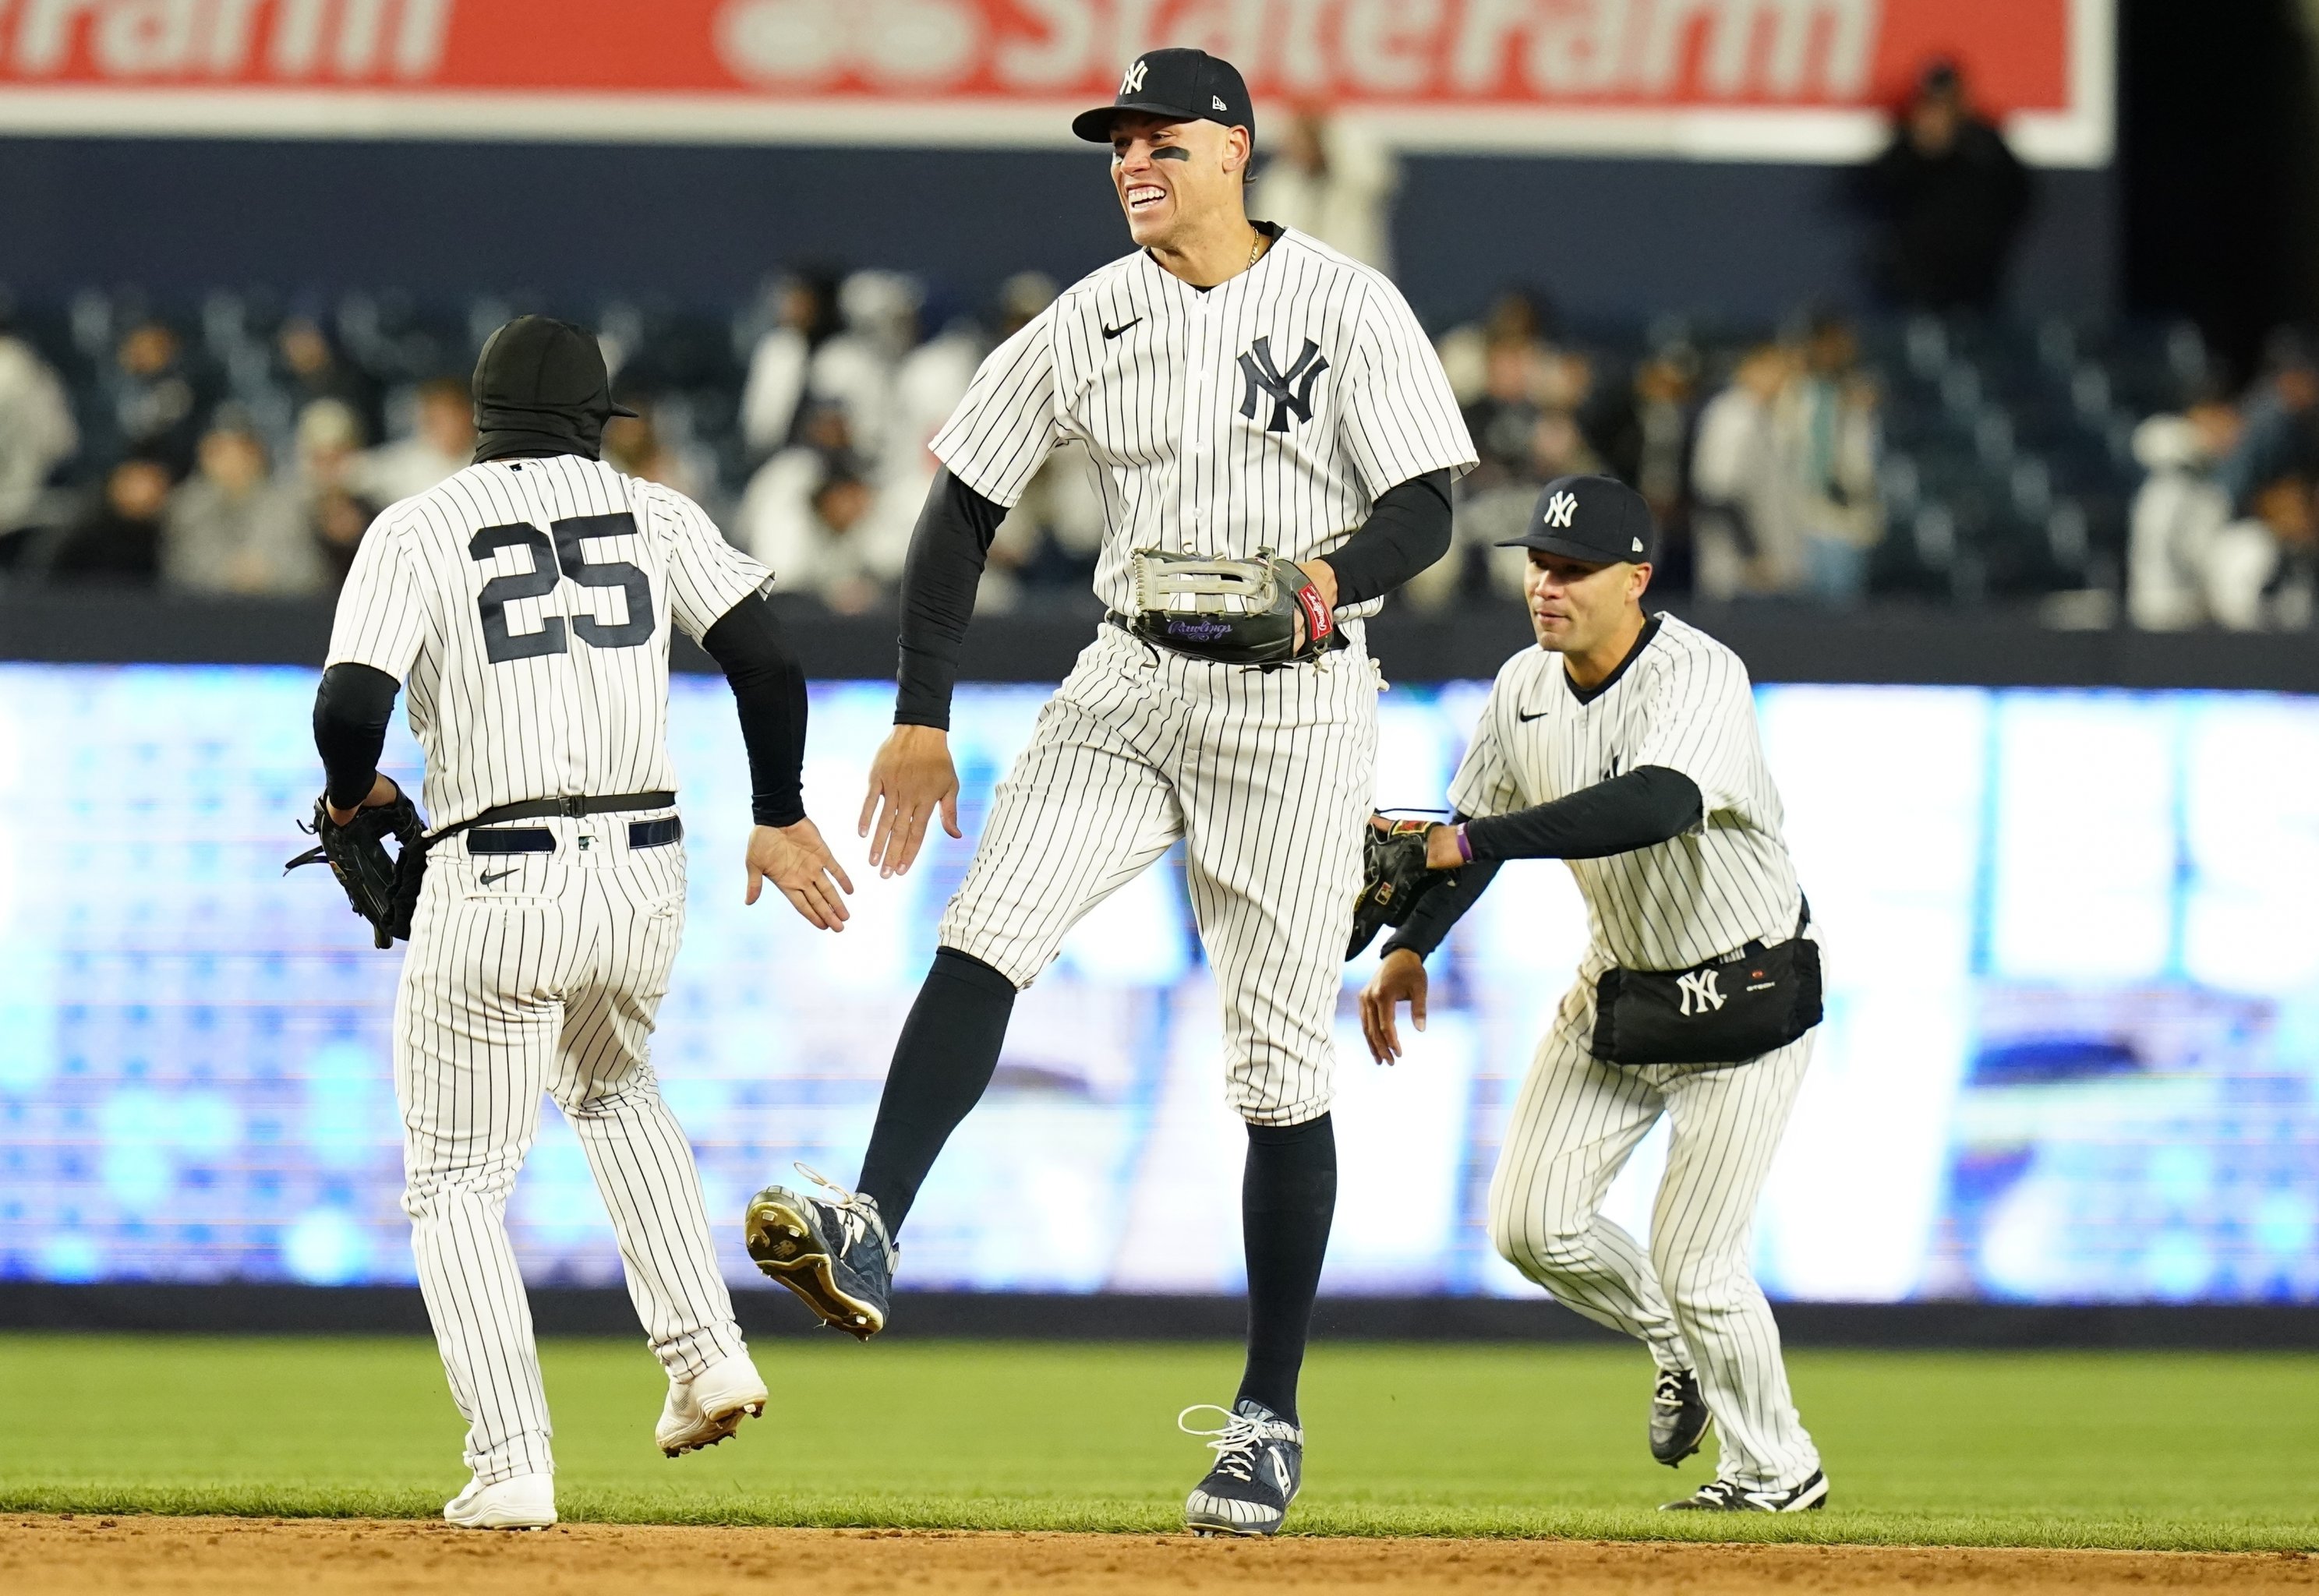 Yankees win 5th straight series, ride high in MLB standings